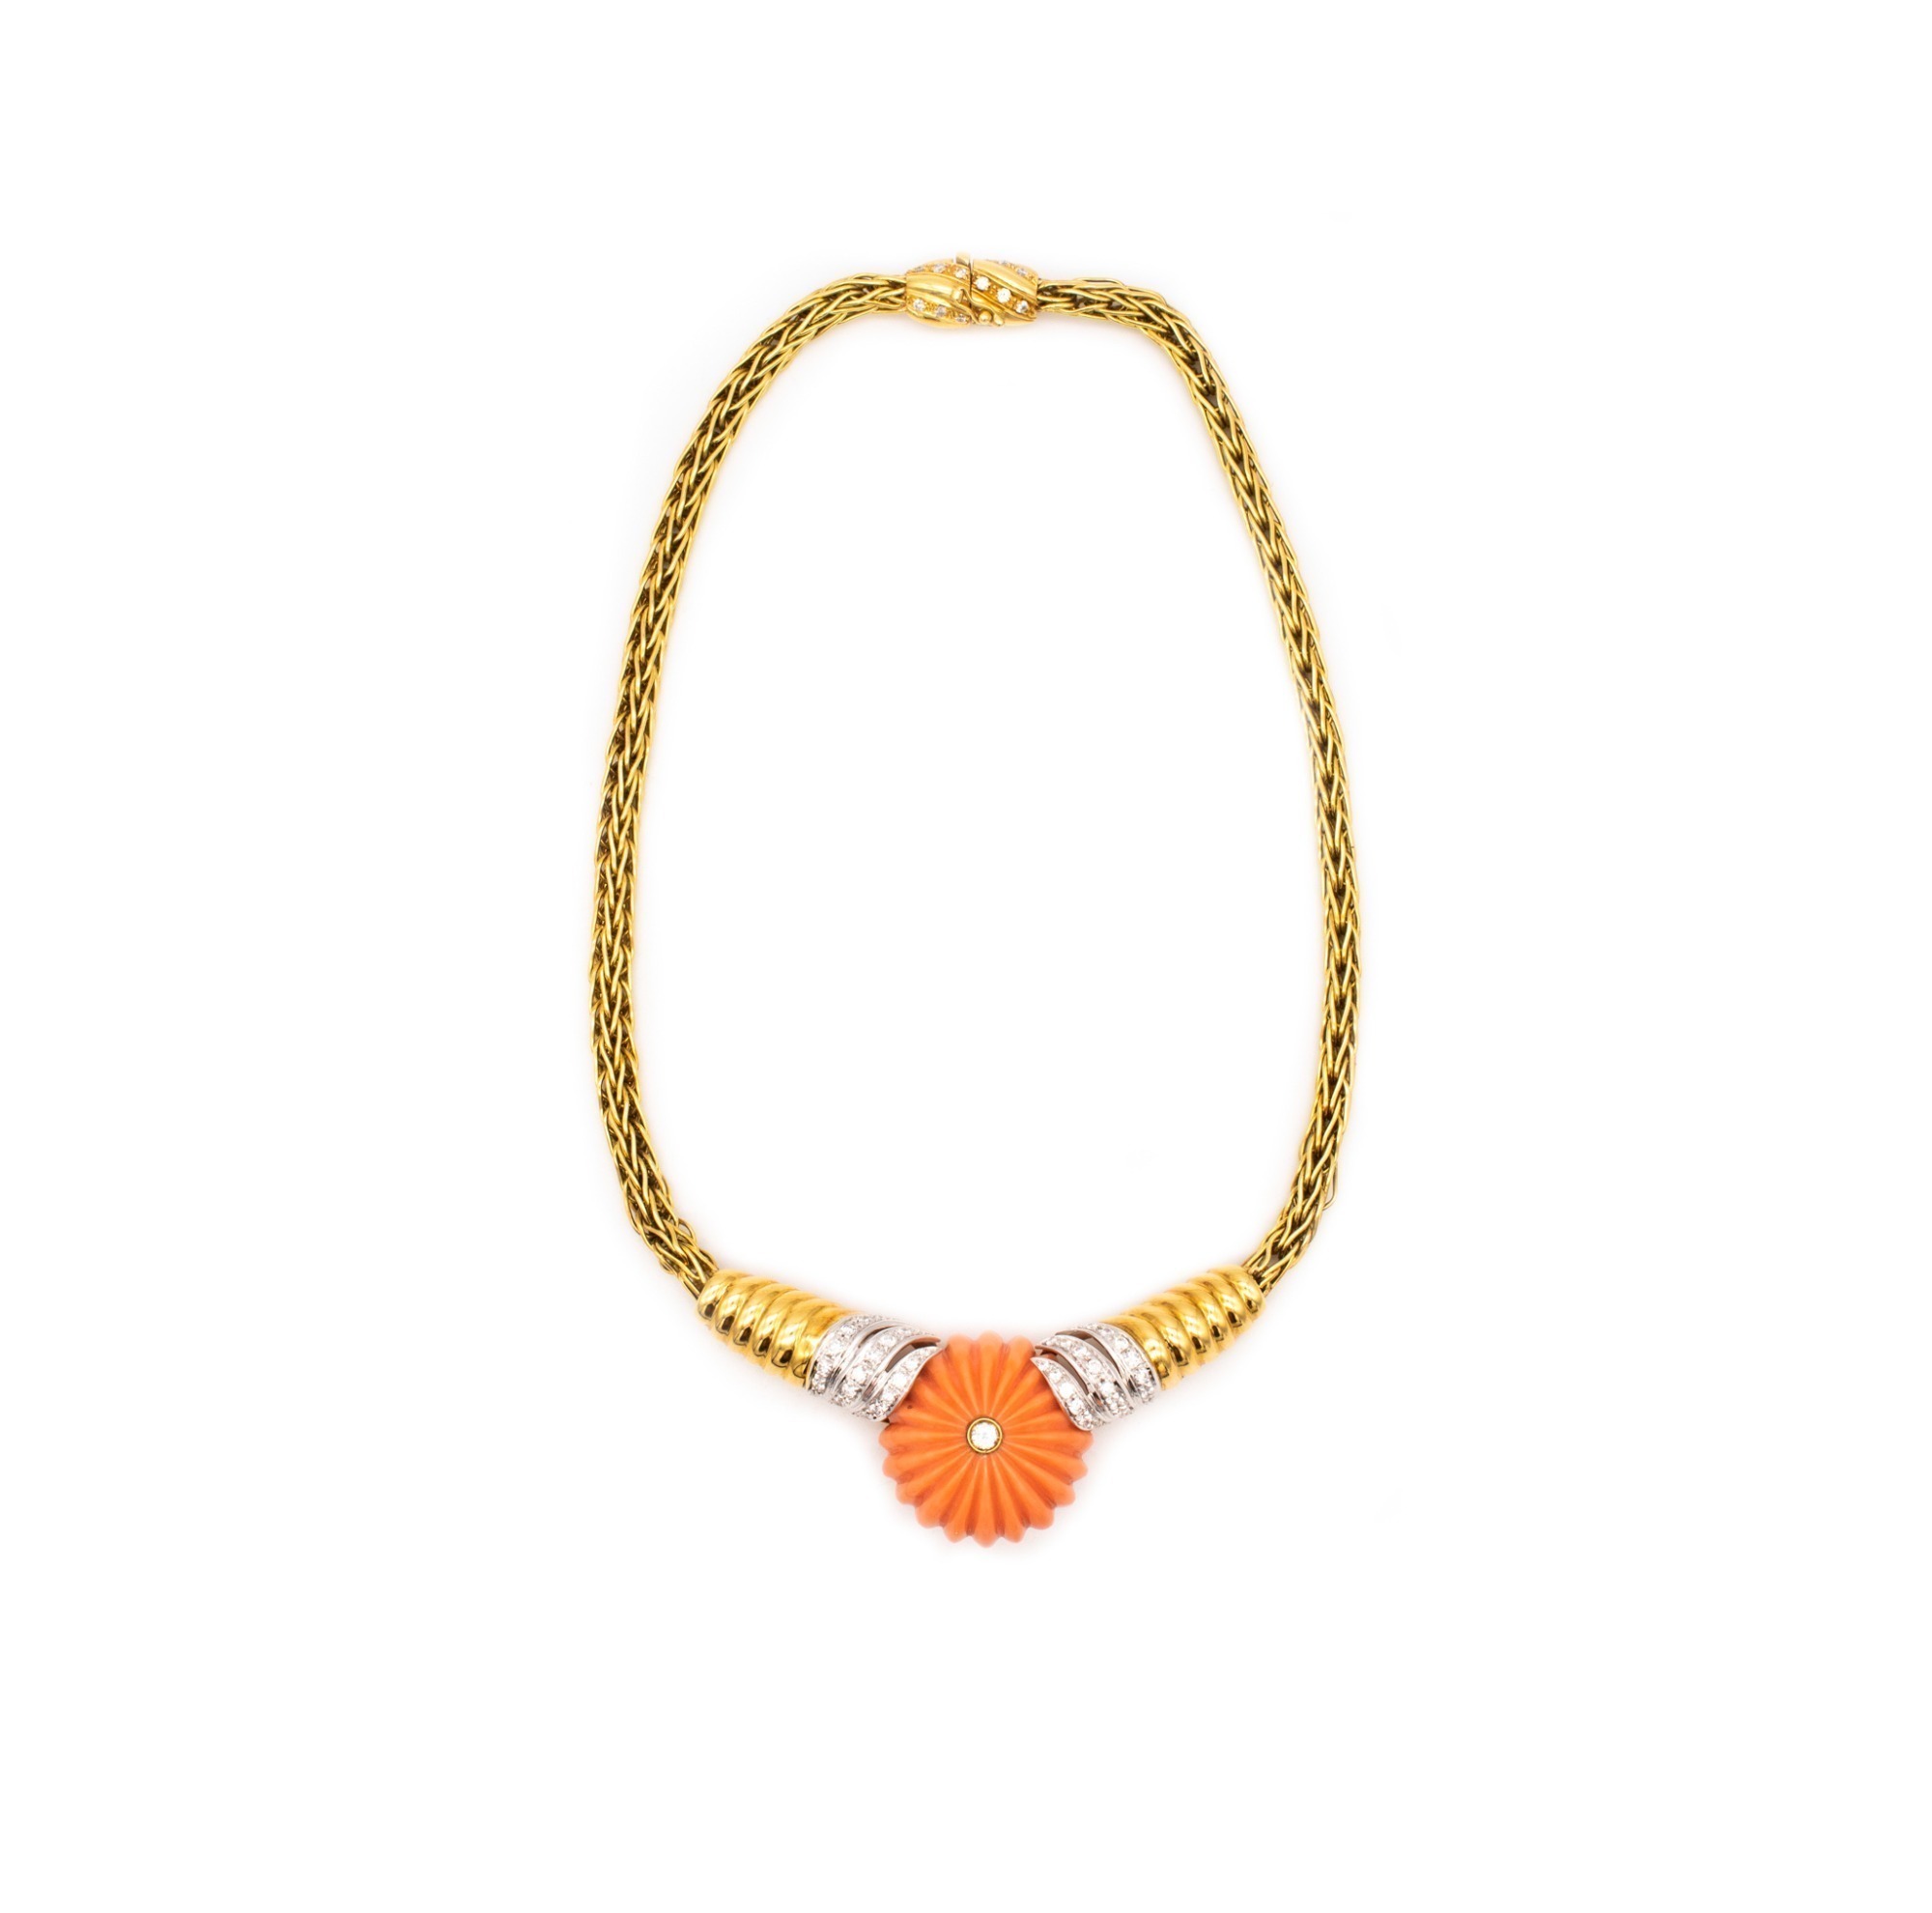 SPRITZER AND FUHRMANN 18K GOLD DIAMOND AND CORAL NECKLACE, CIRCA 1960’S